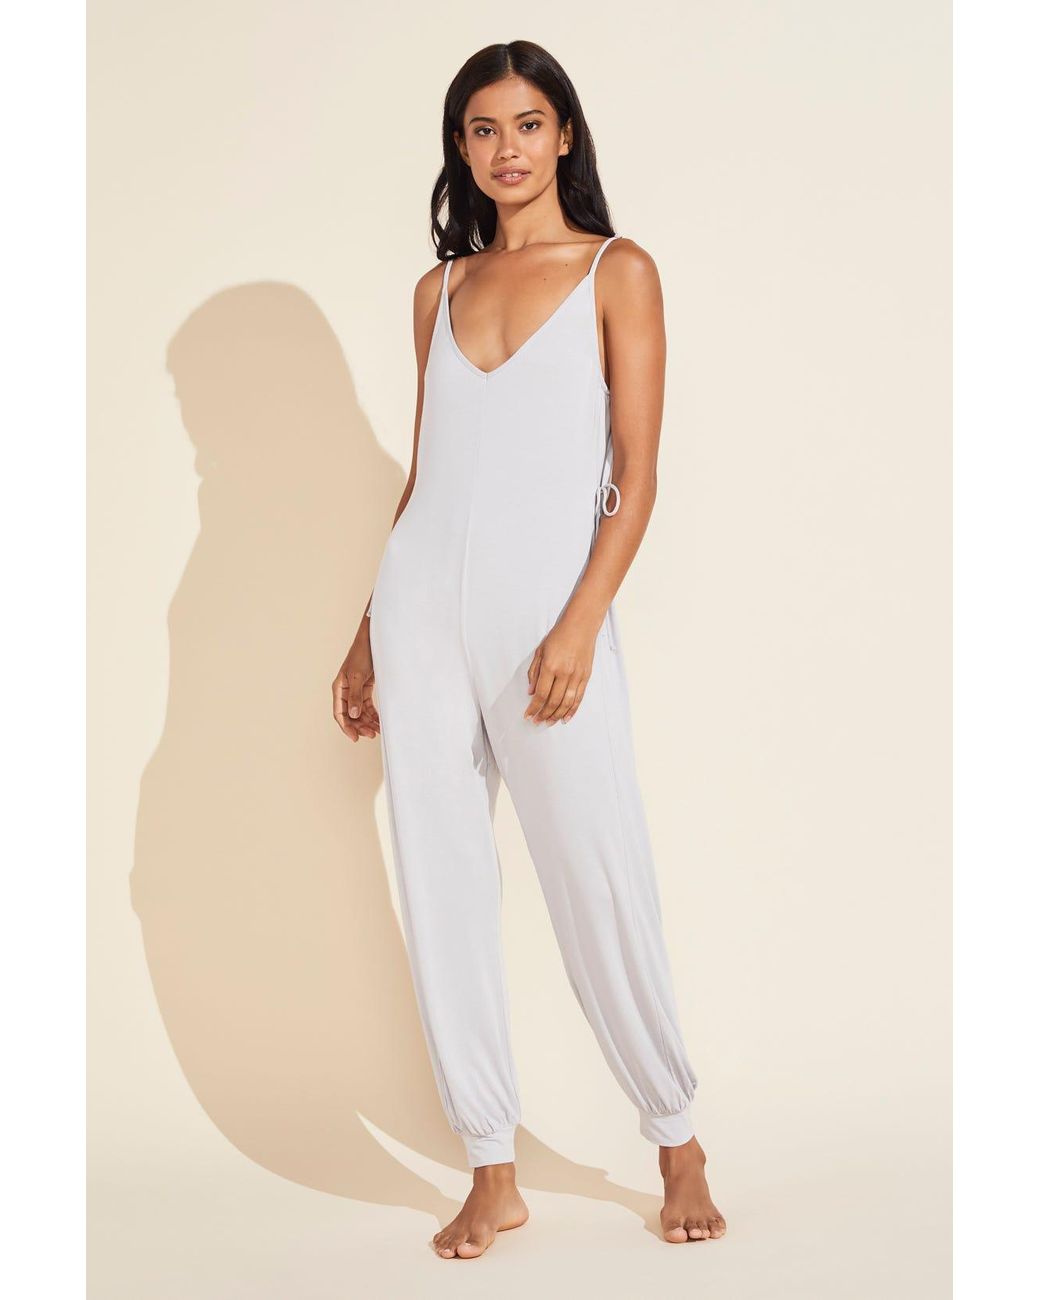 Eberjey Finley Eco Bamboo Jumpsuit in Natural | Lyst